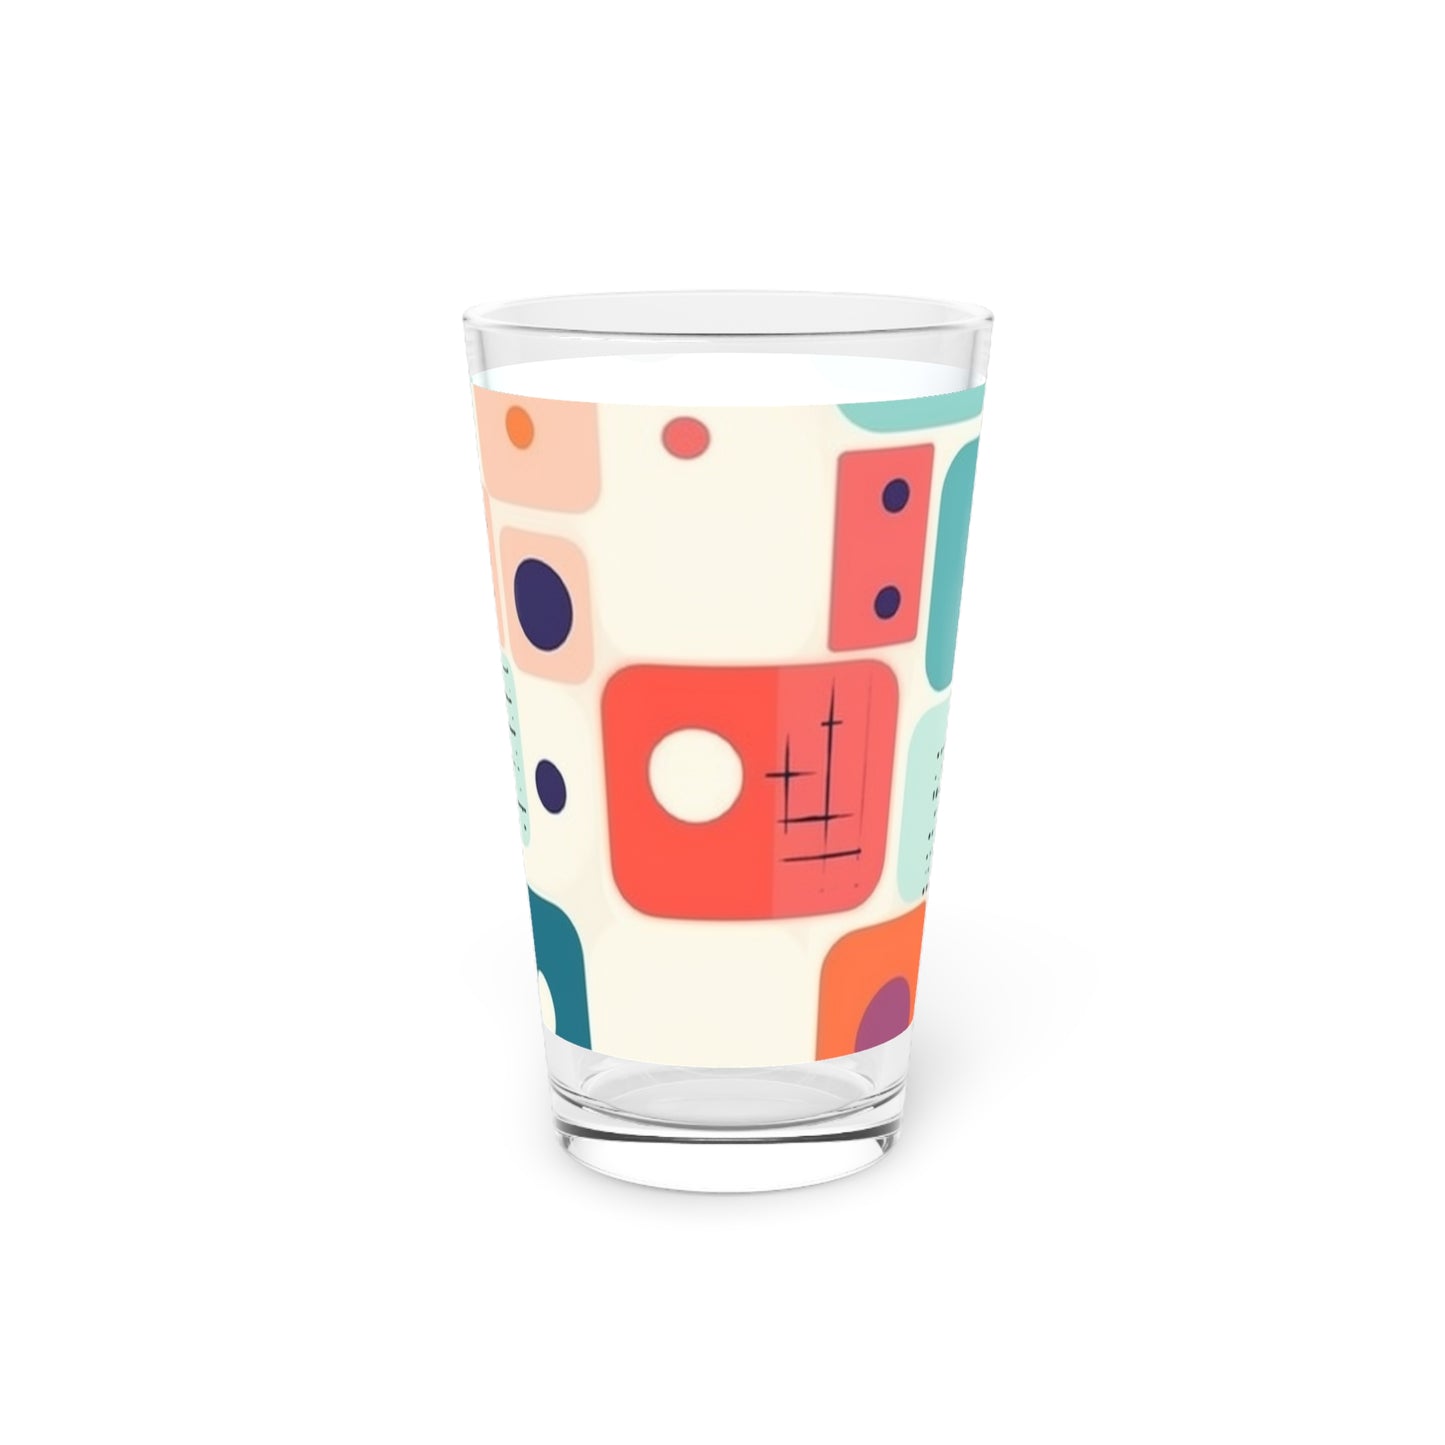 Retro Chic: Atomic Age-Inspired Pint Glass